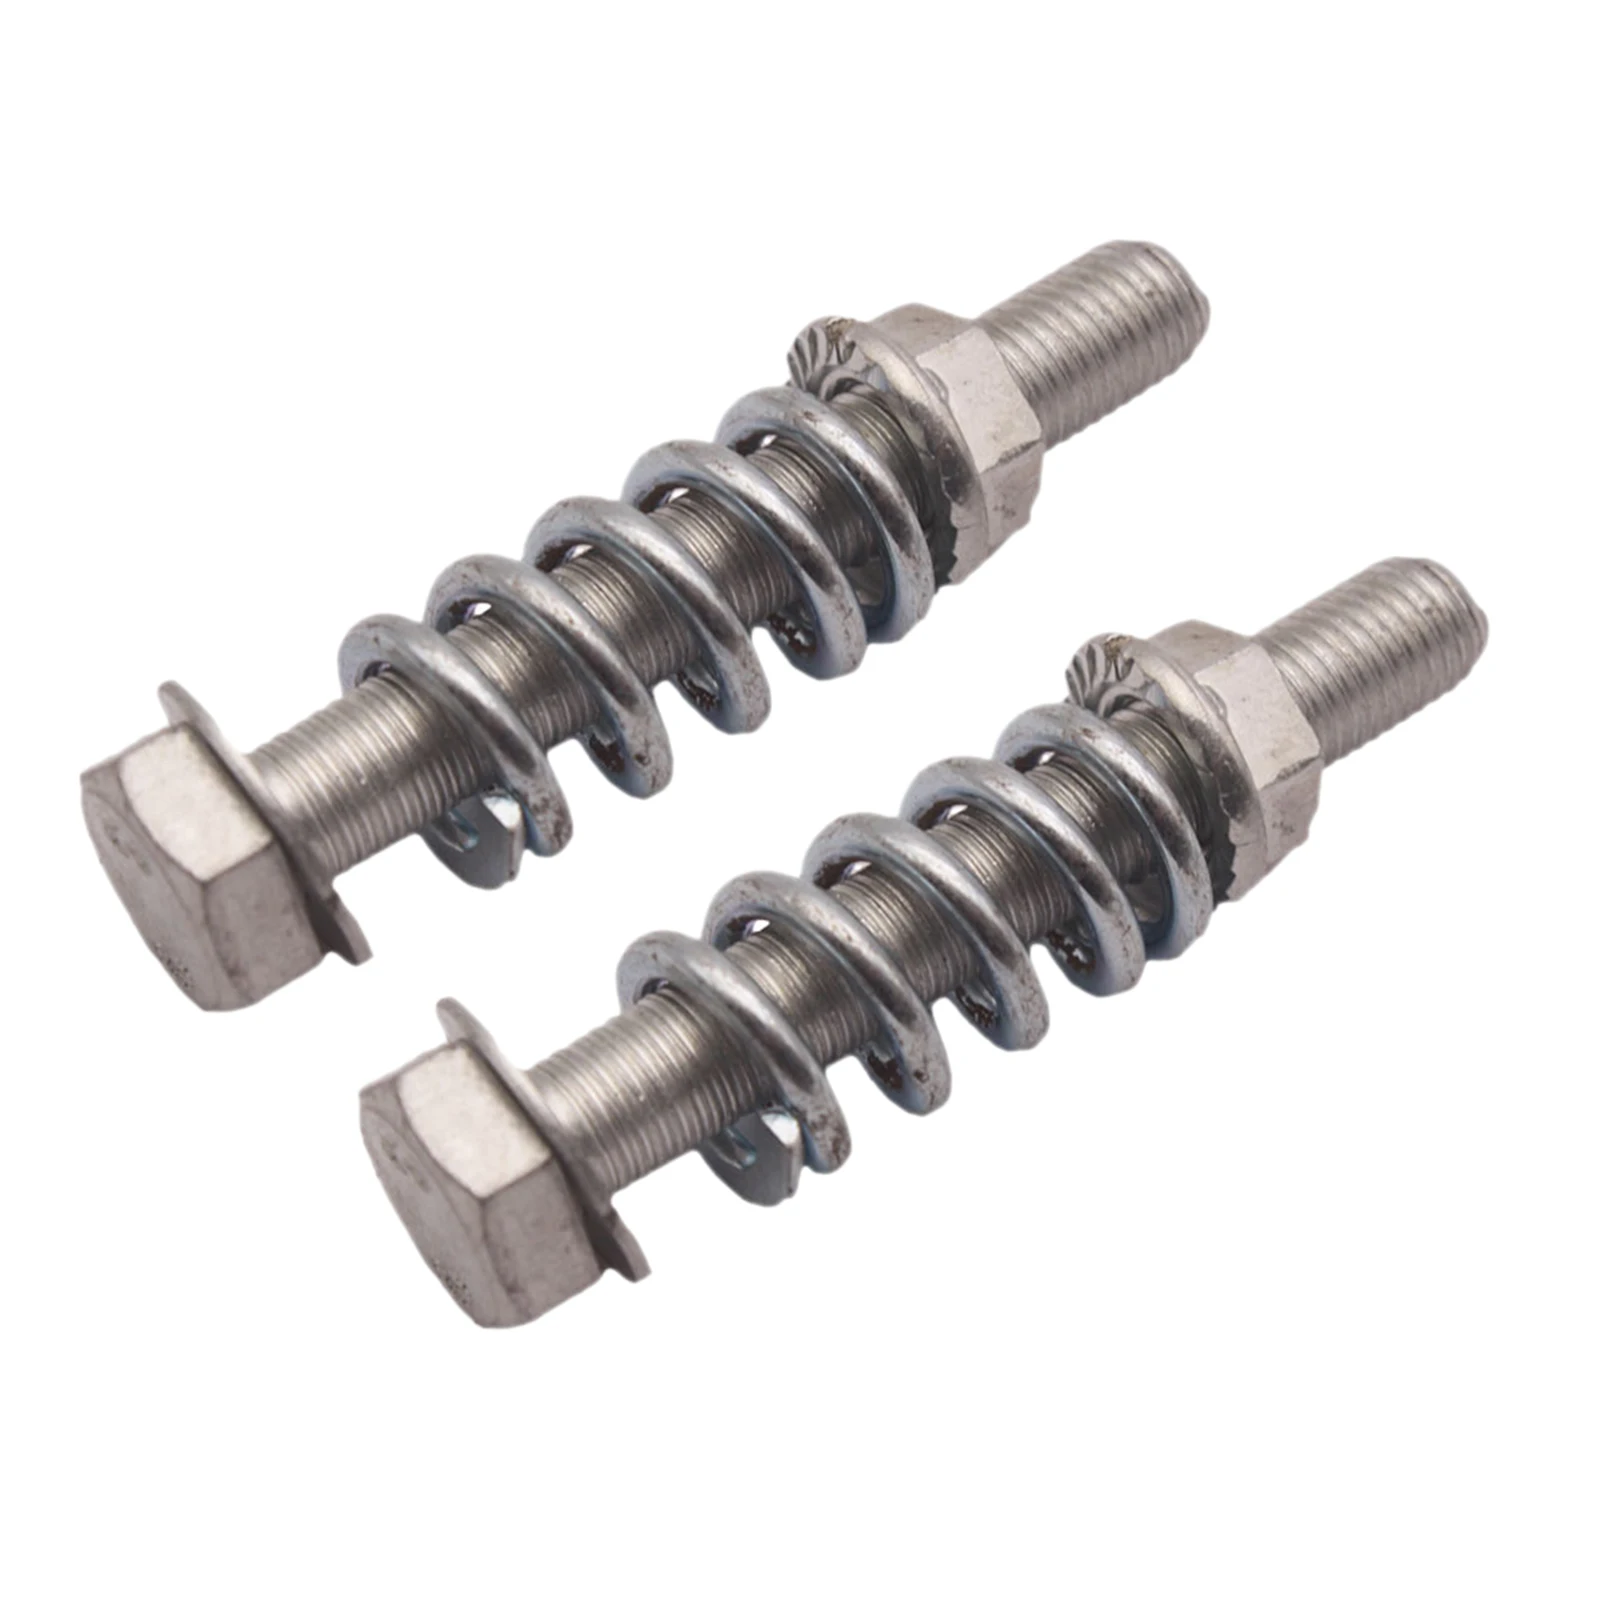 2x M10x1.5 Exhaust Bolt and Spring Set Replacement High quality Accessories